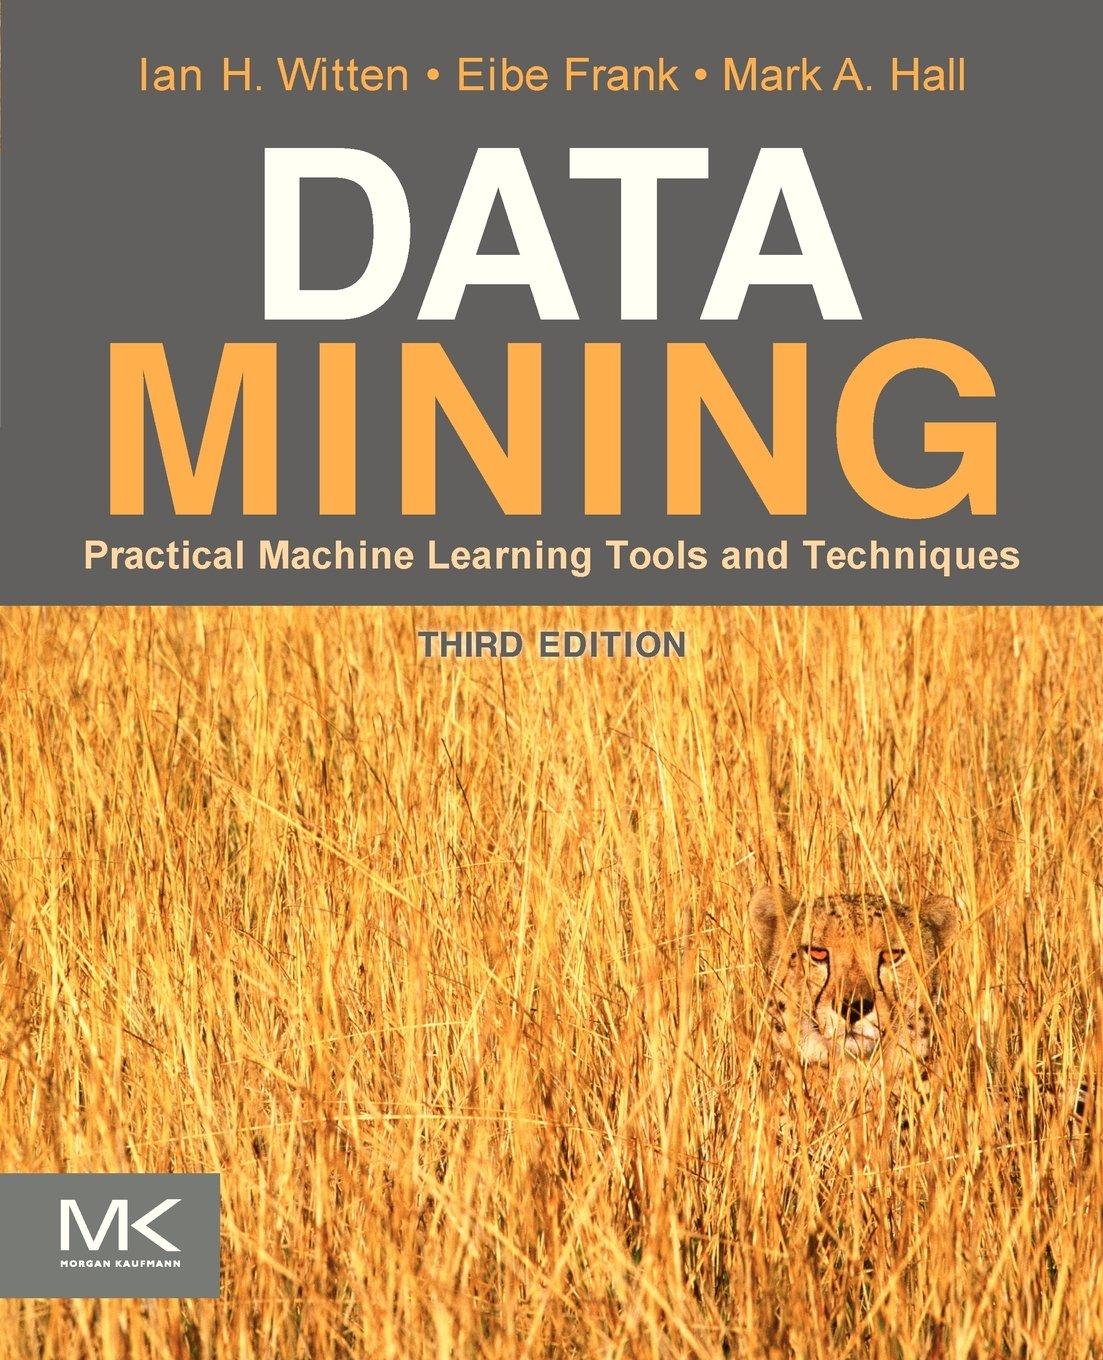 data mining  practical machine learning tools and techniques 3rd edition ian h. witten , eibe frank , mark a.